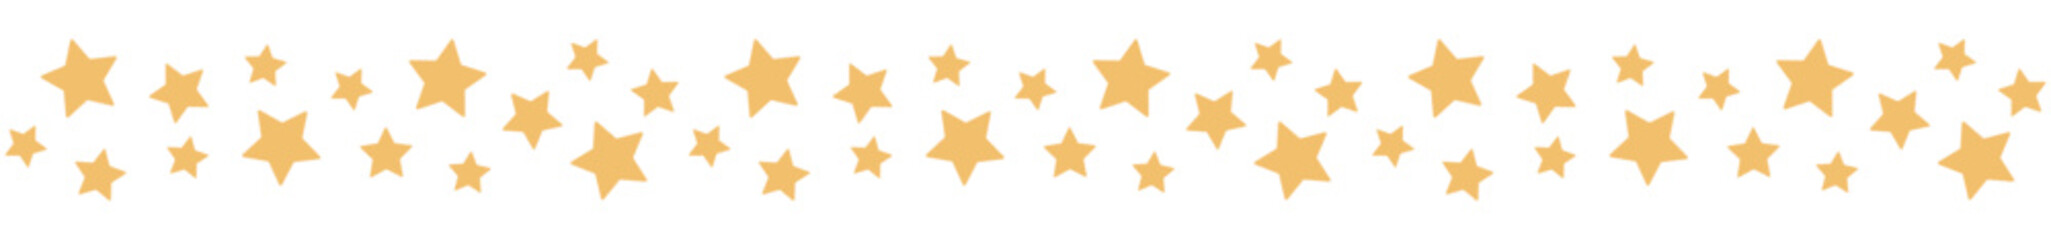 Seamless border garland with yellow stars. Can be used for card, borders, kids' bedding, textile. Isolated vector and PNG illustration on transparent background.